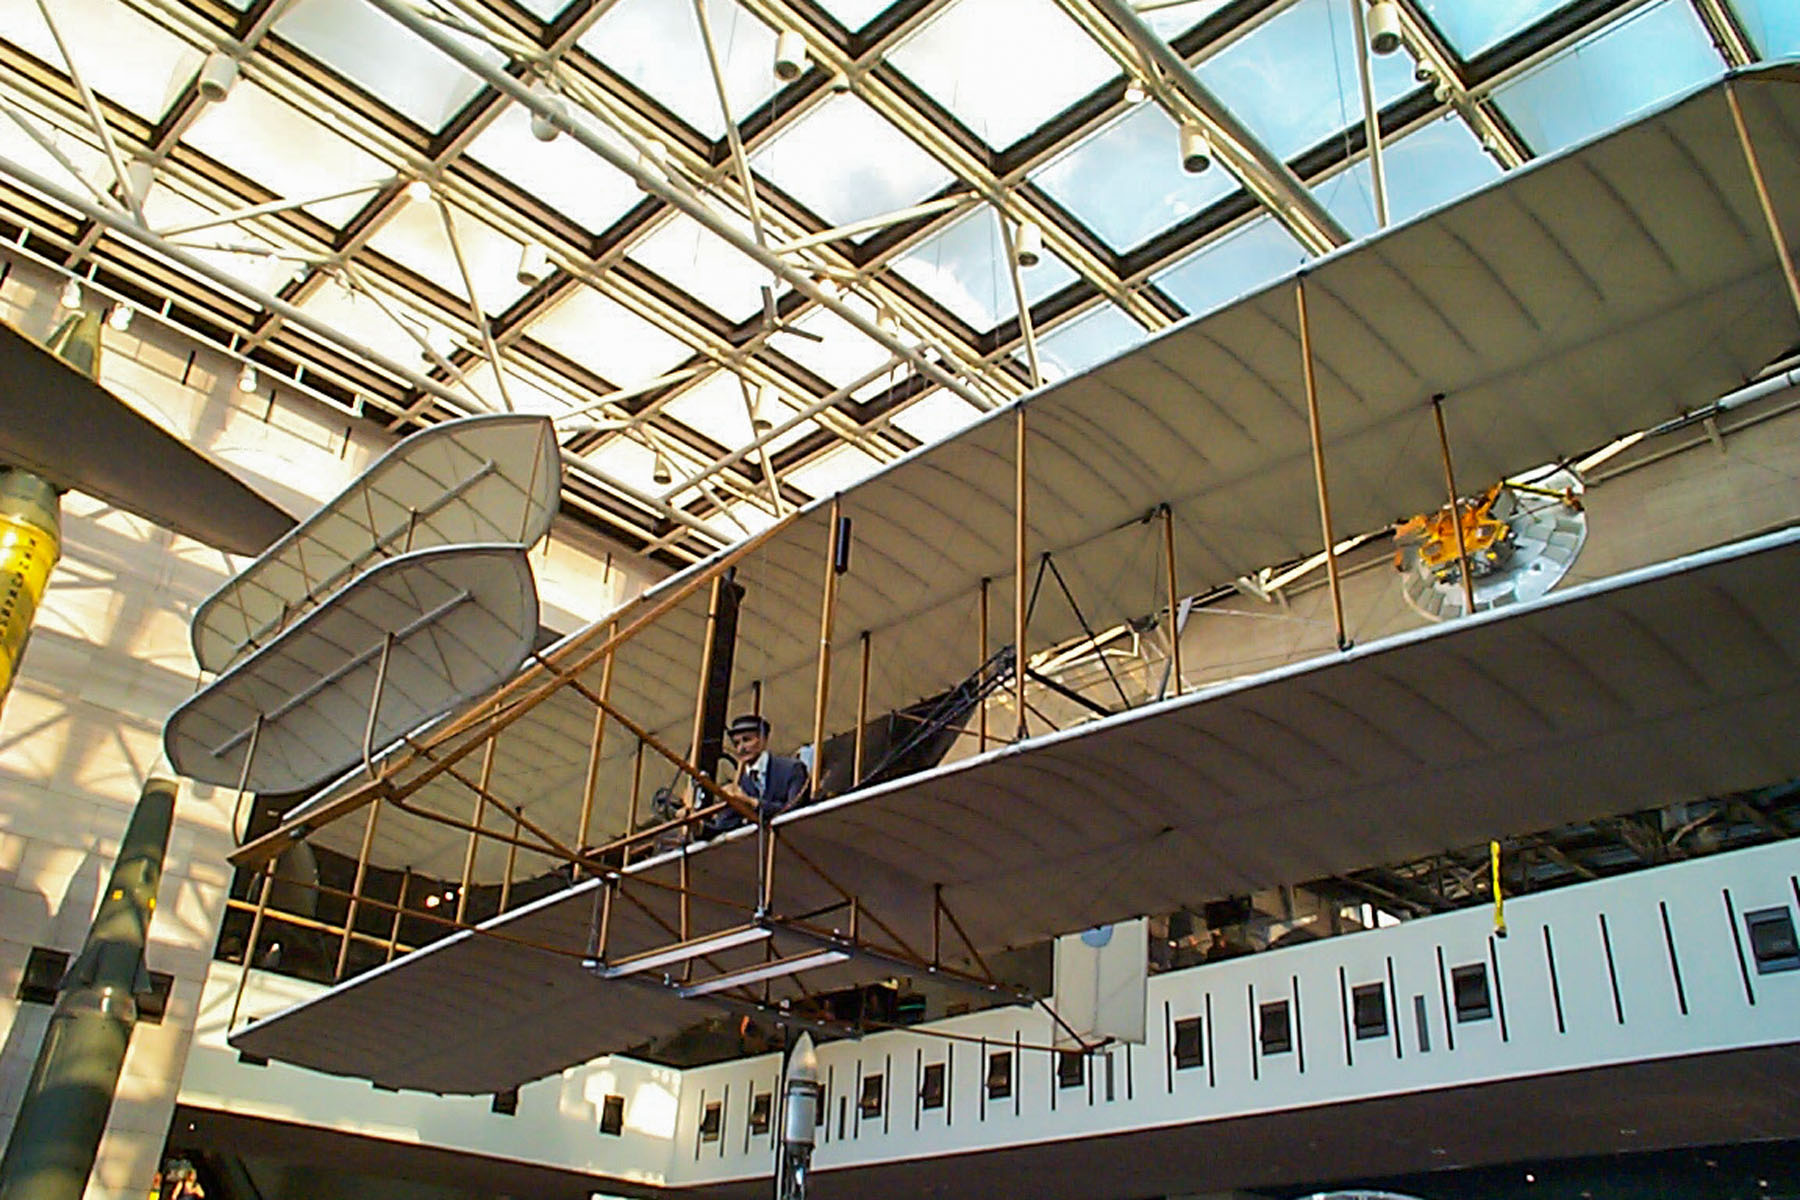 1903 Wright Flyer, National Air and Space Museum, Washington, DC.  Click for next photo.